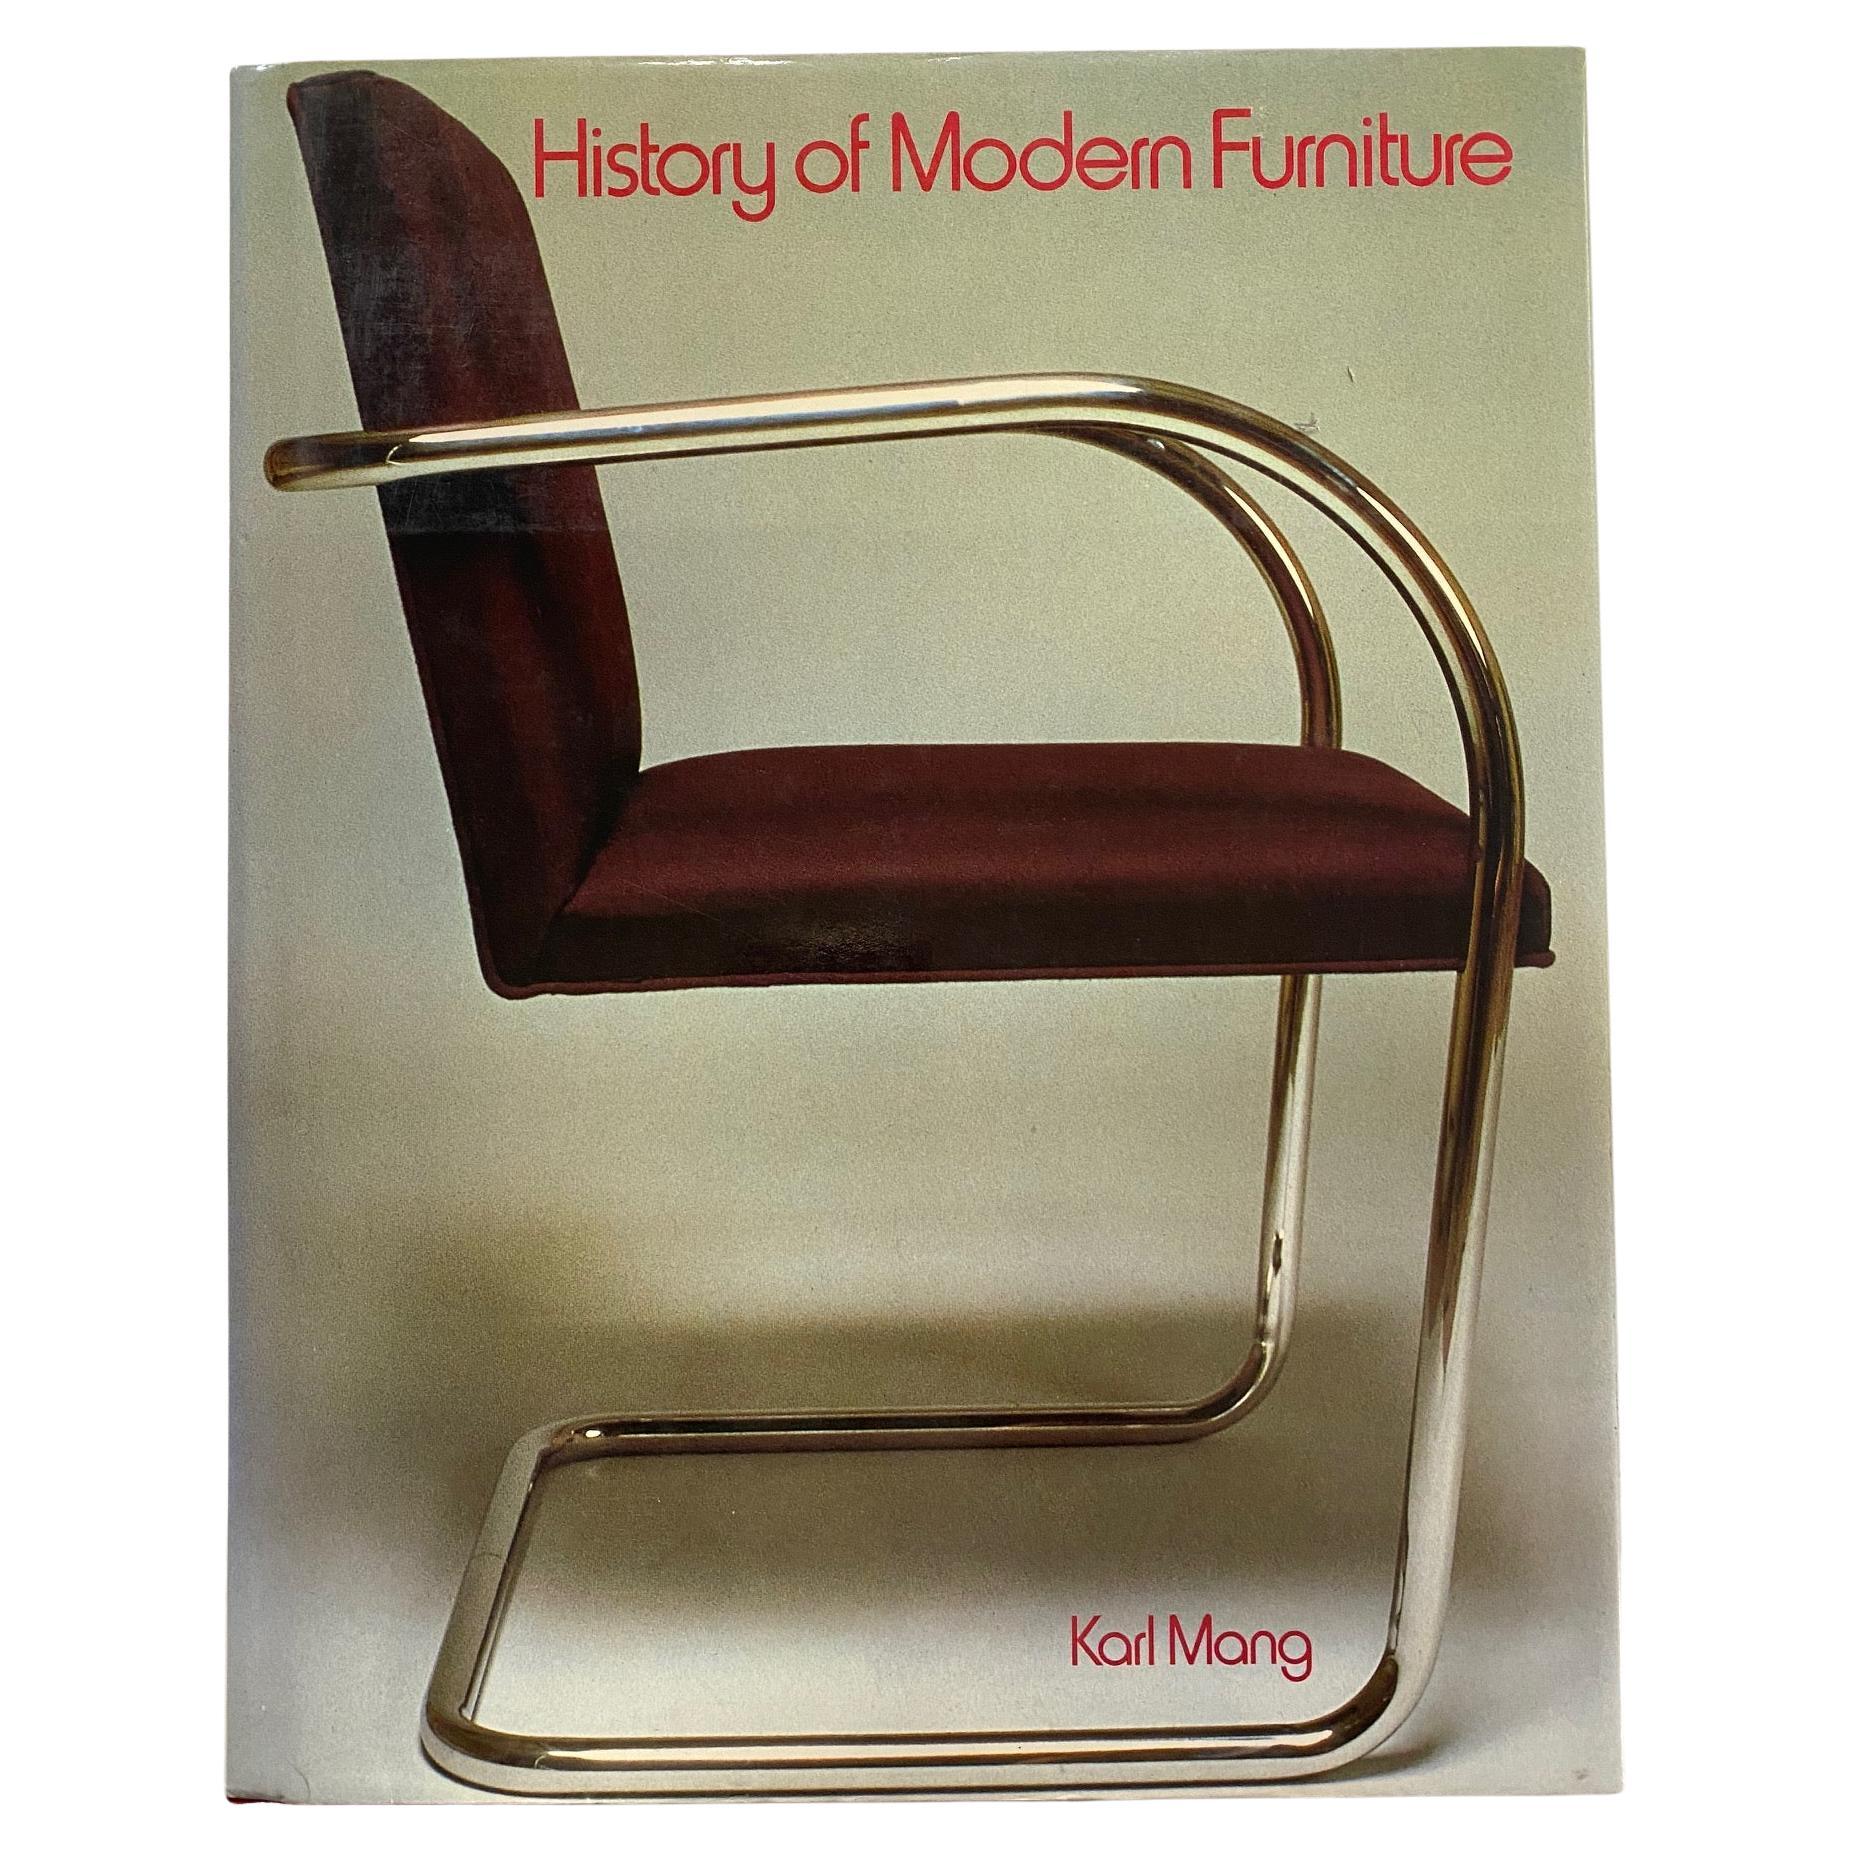 History of Modern Furniture by Karl Mang (Book)